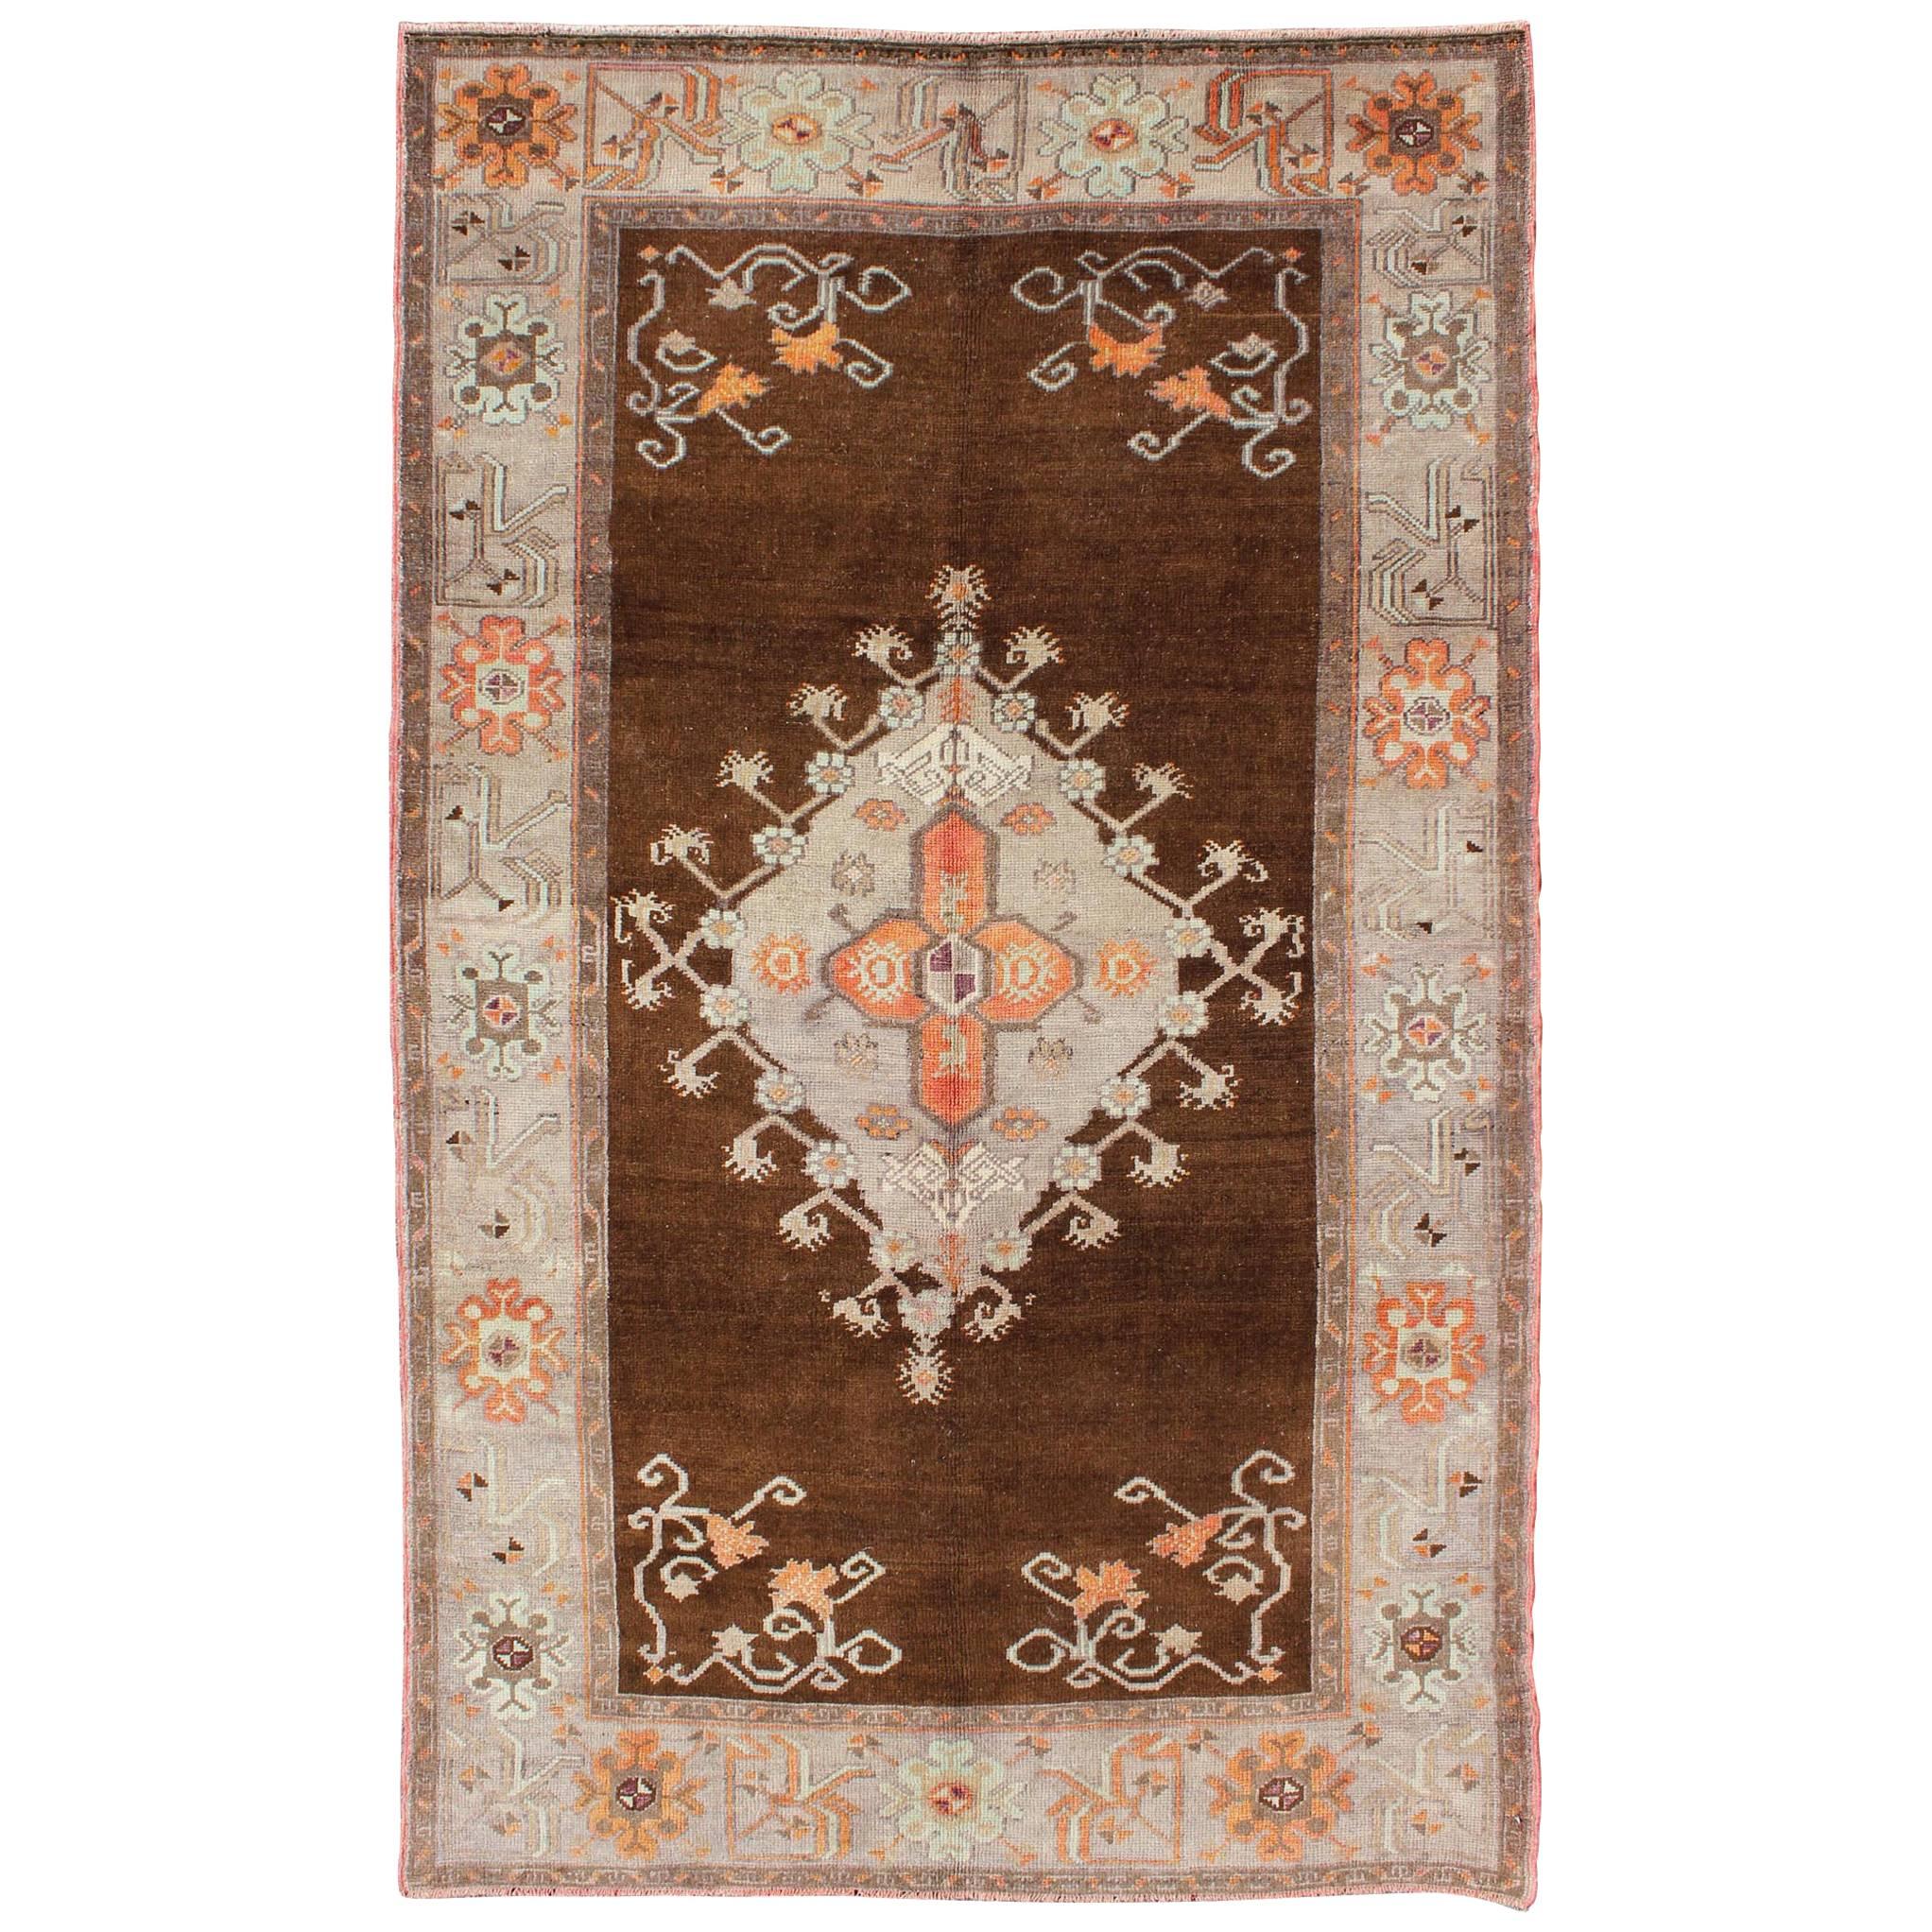 Vintage Turkish Oushak Rug in Chocolate Brown, Gray, Taupe and Burnt Orange